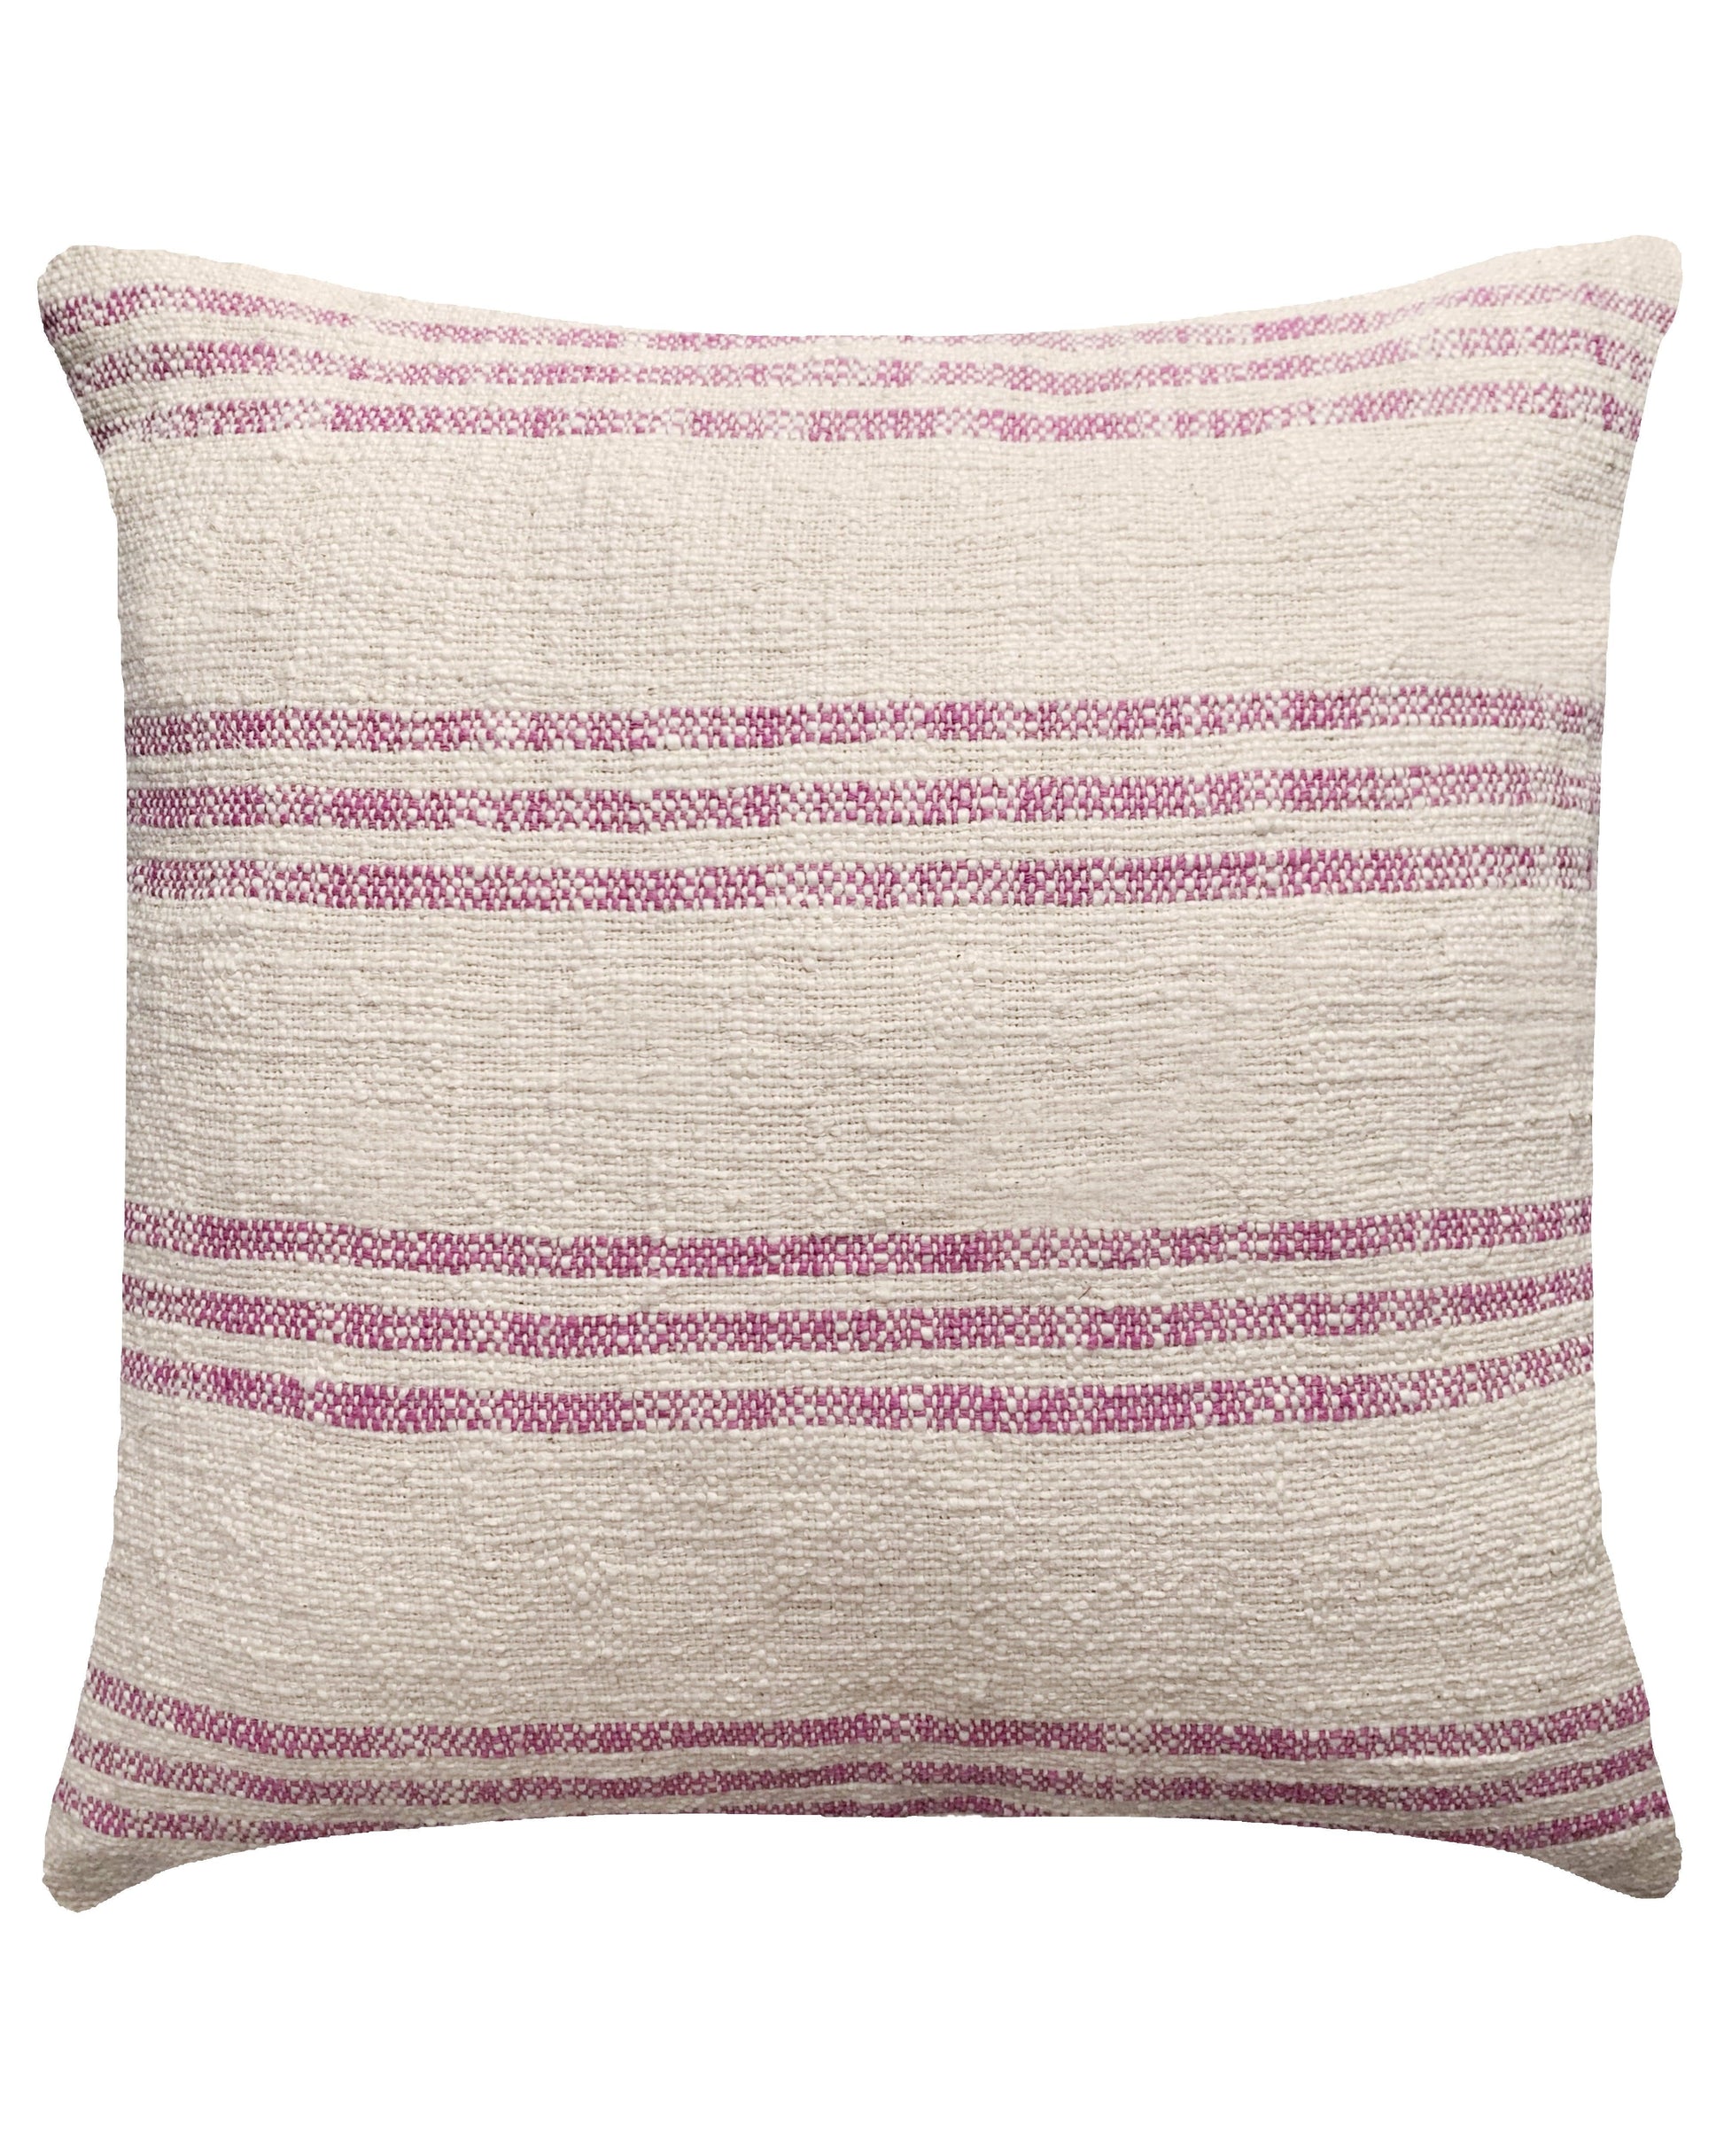 PILLOWPIA trilli pillow in orchid cover only